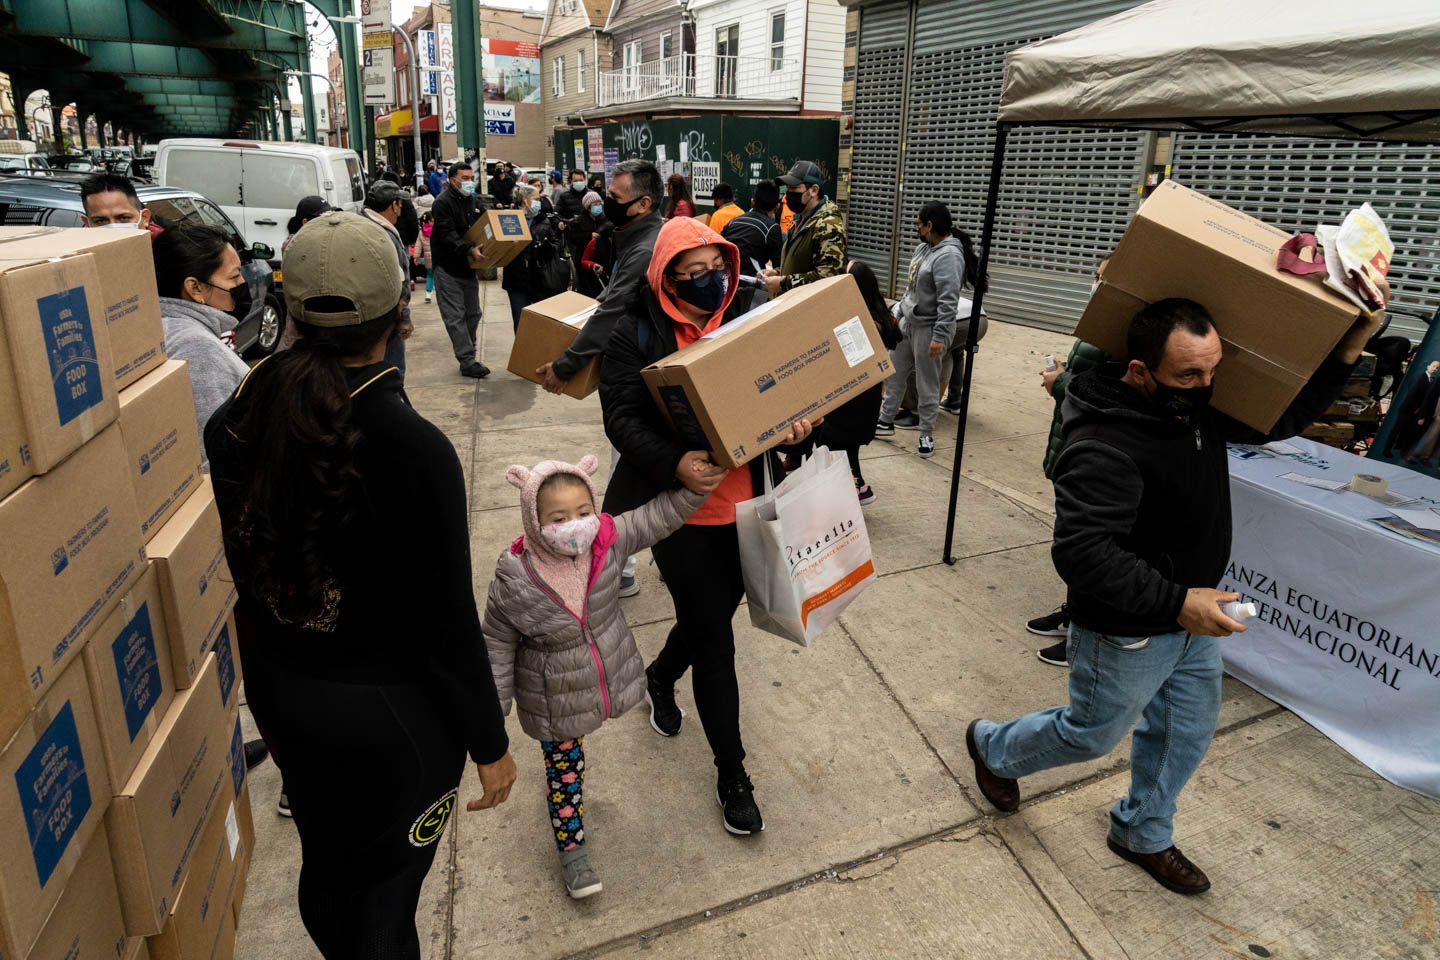 November 28, 2020: Boxes of food donated by the U. S. Department of Agriculture being distributed by the Centro Comunitario Andino. 104-10 Roosevelt Avenue, Queens, New York. © Camilo José Vergara